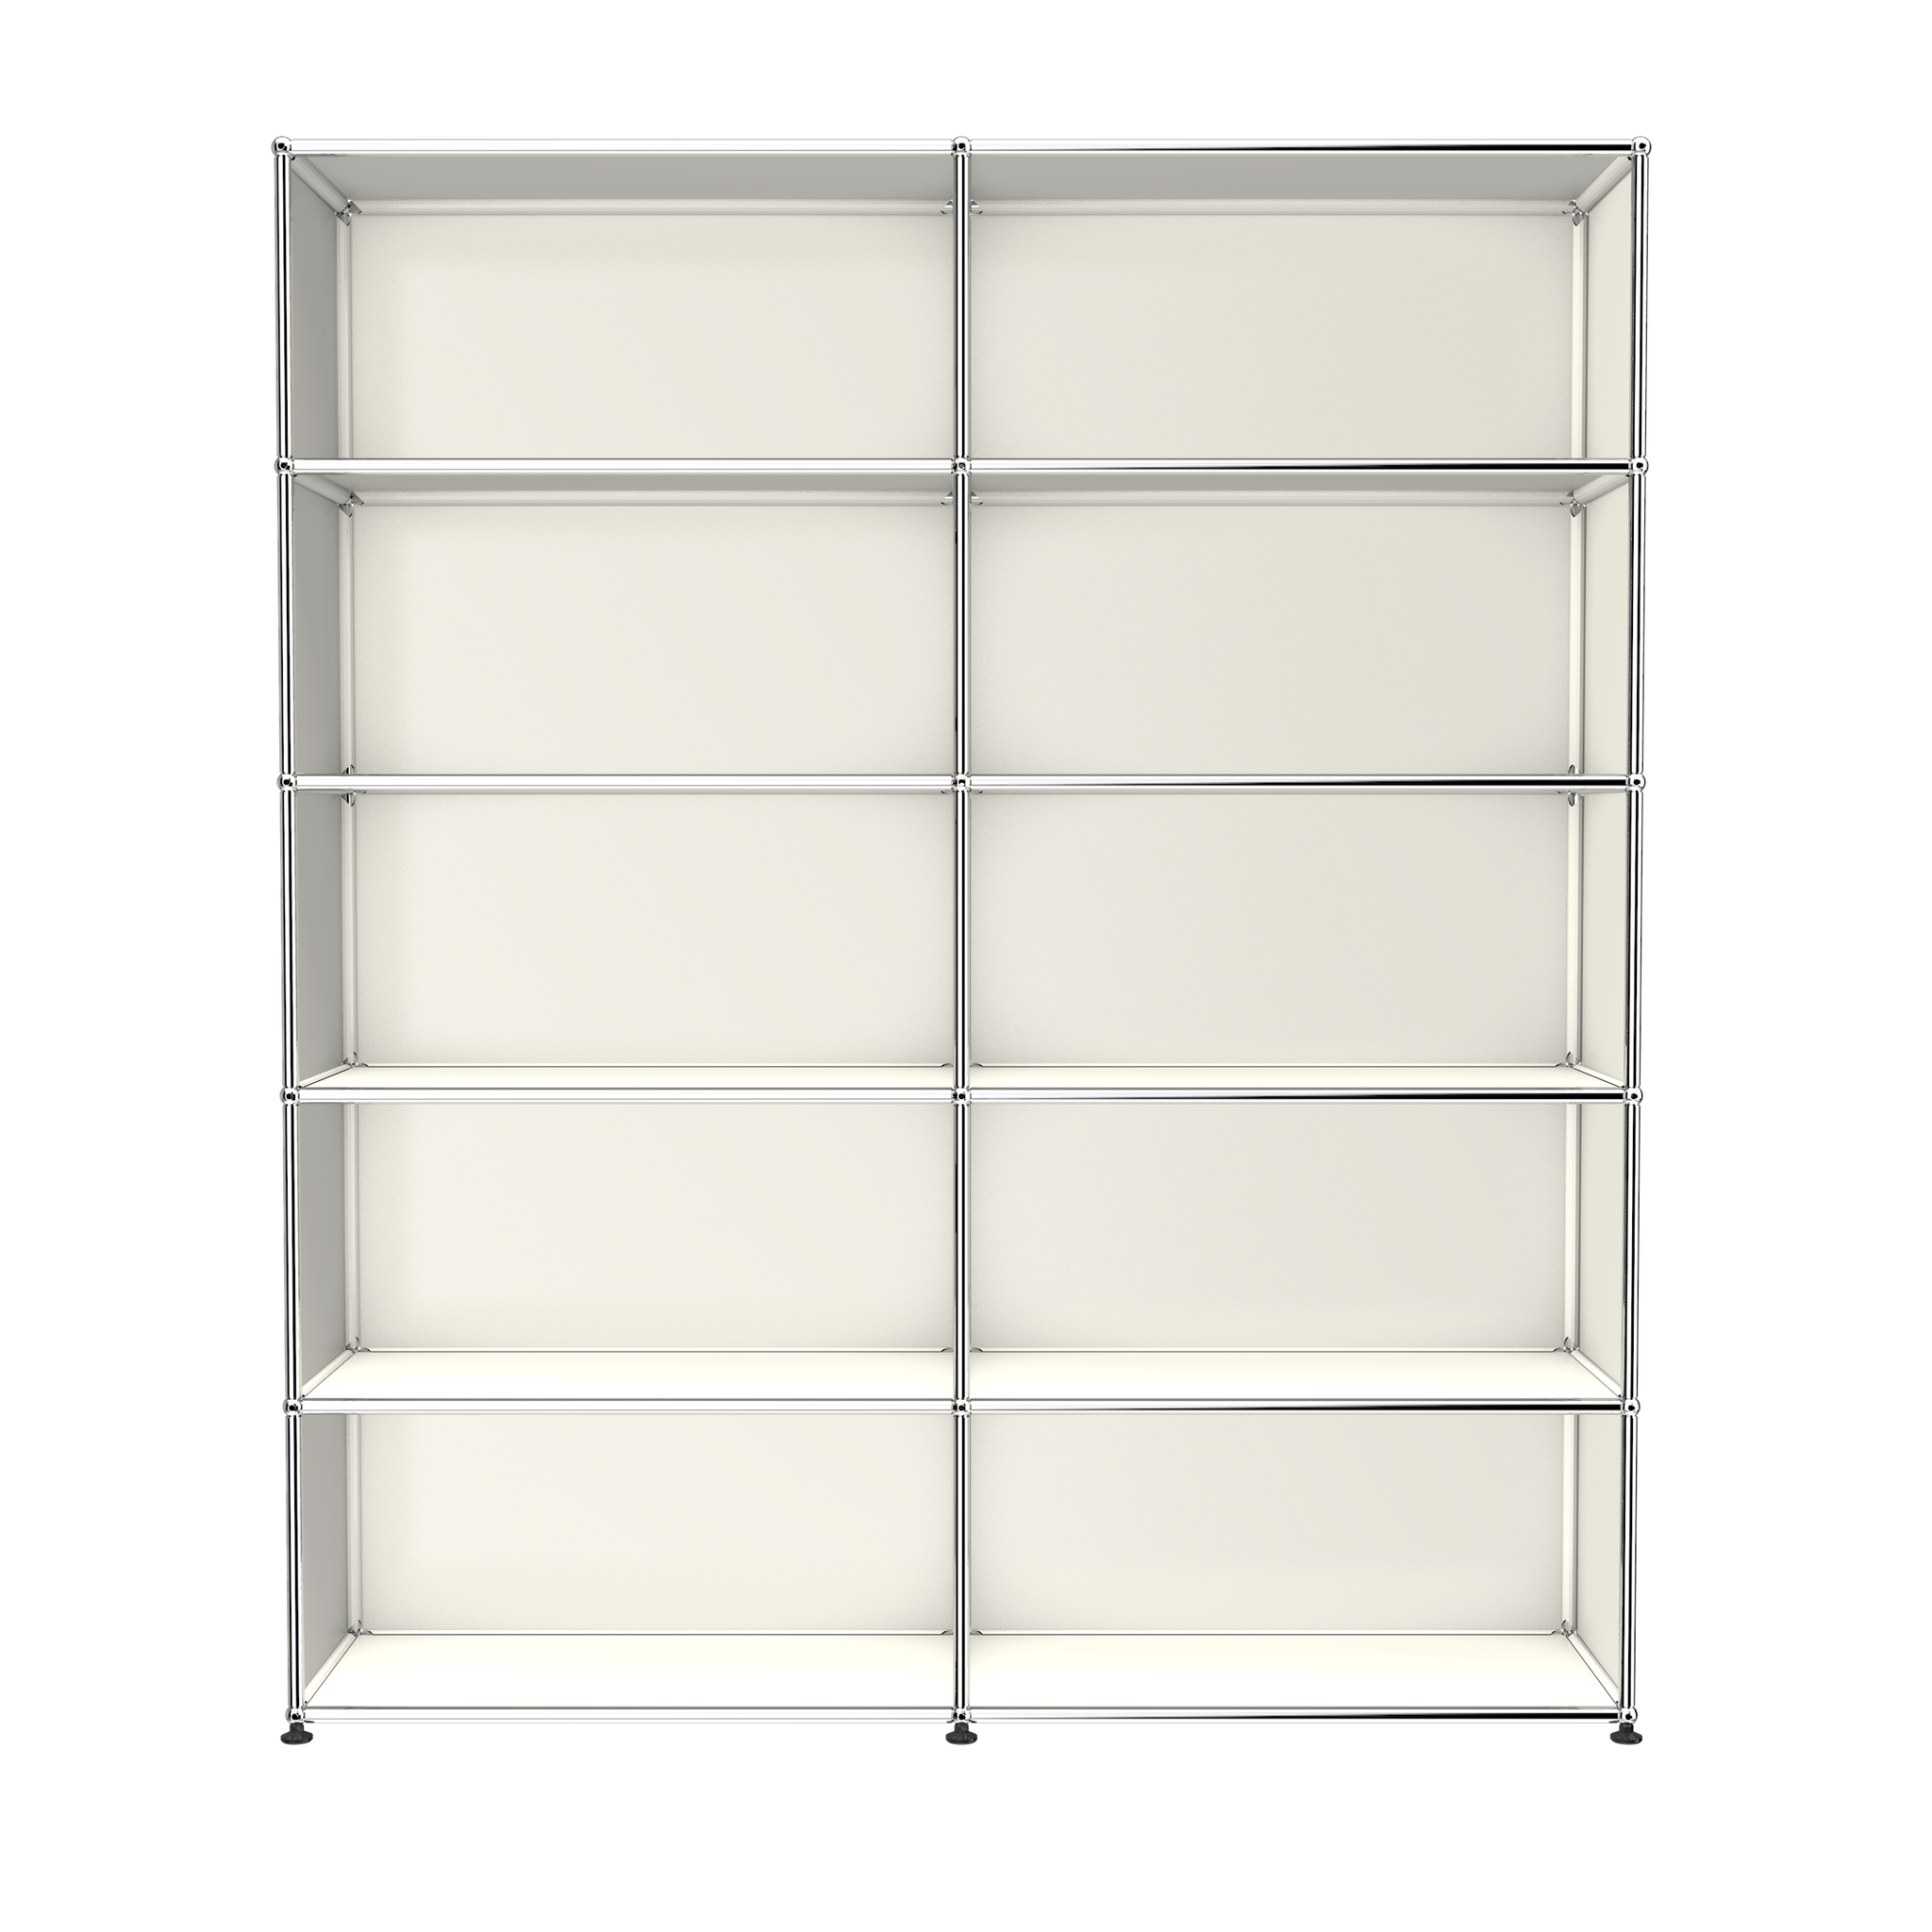 USM Haller Large Open Shelving Unit (H2) in Pure White